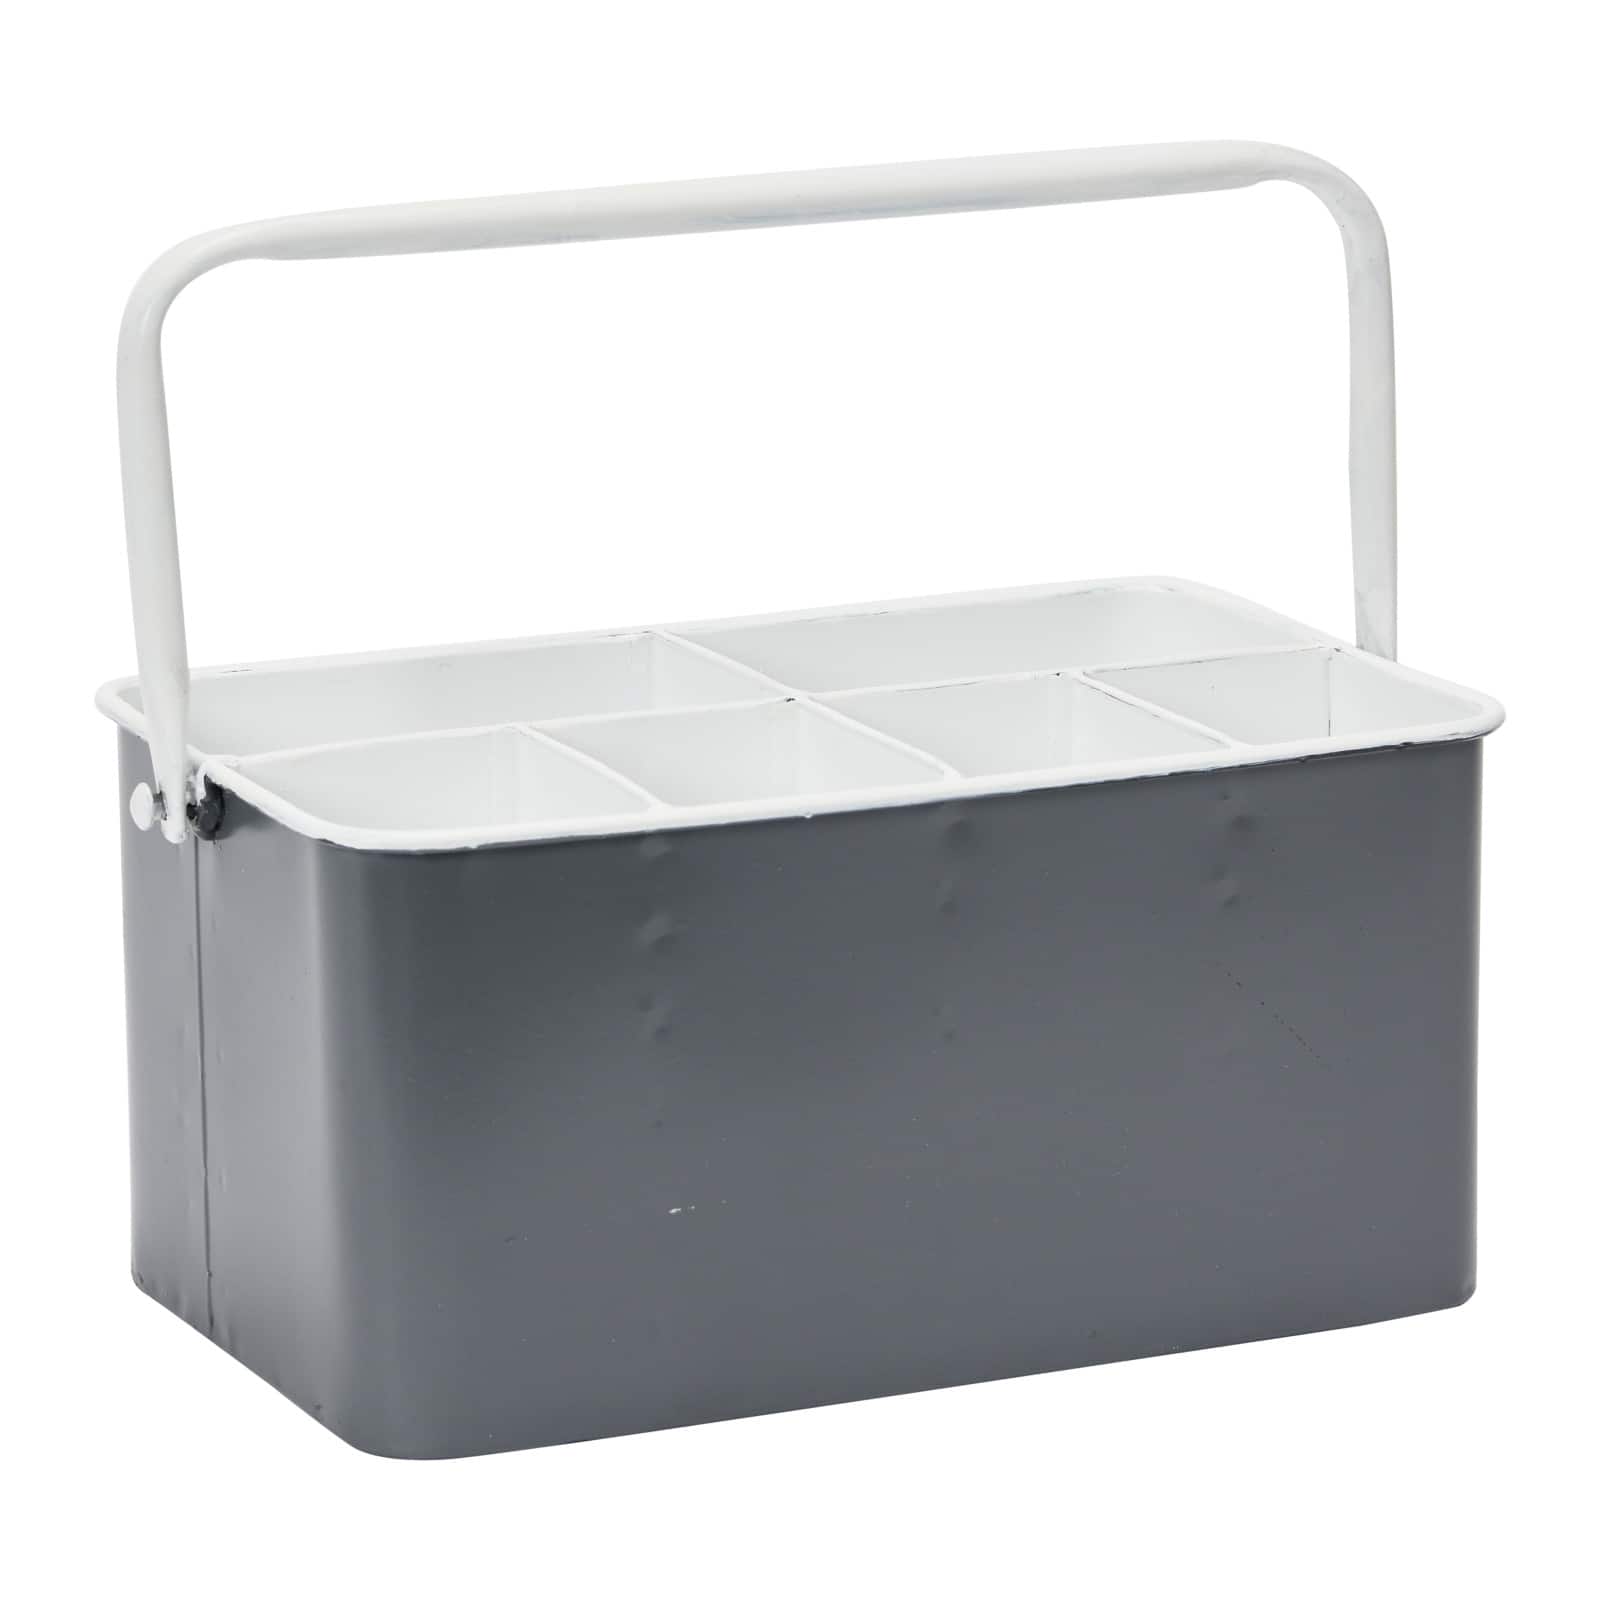 6-Compartment Metal Caddy with Handle